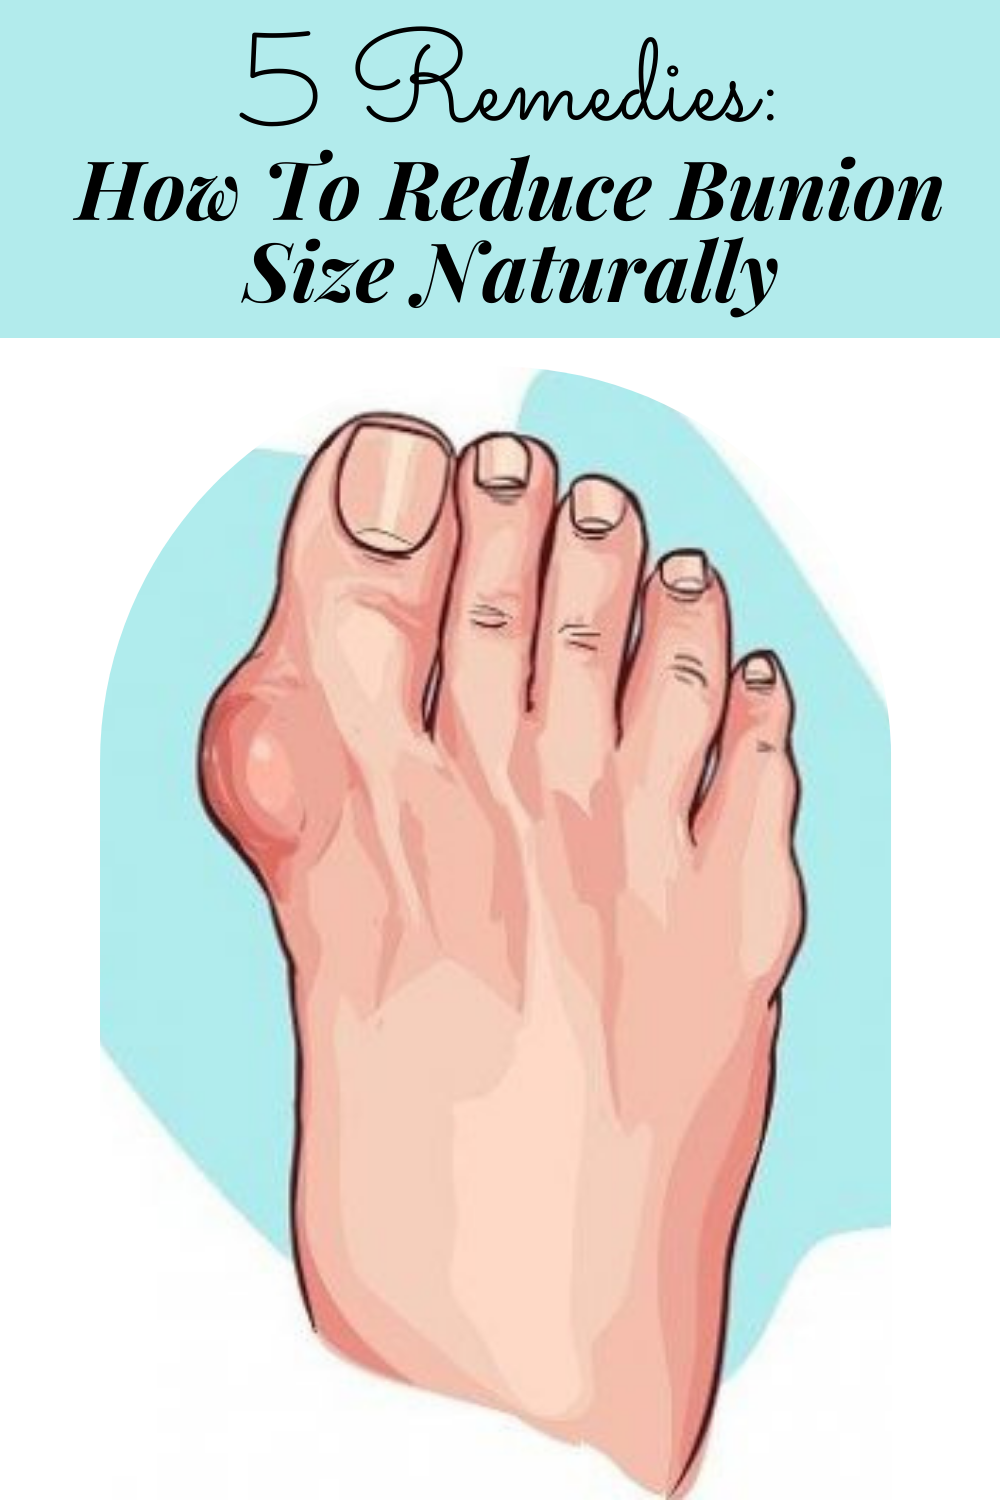 5 Remedies: How To Reduce Bunion Size Naturally